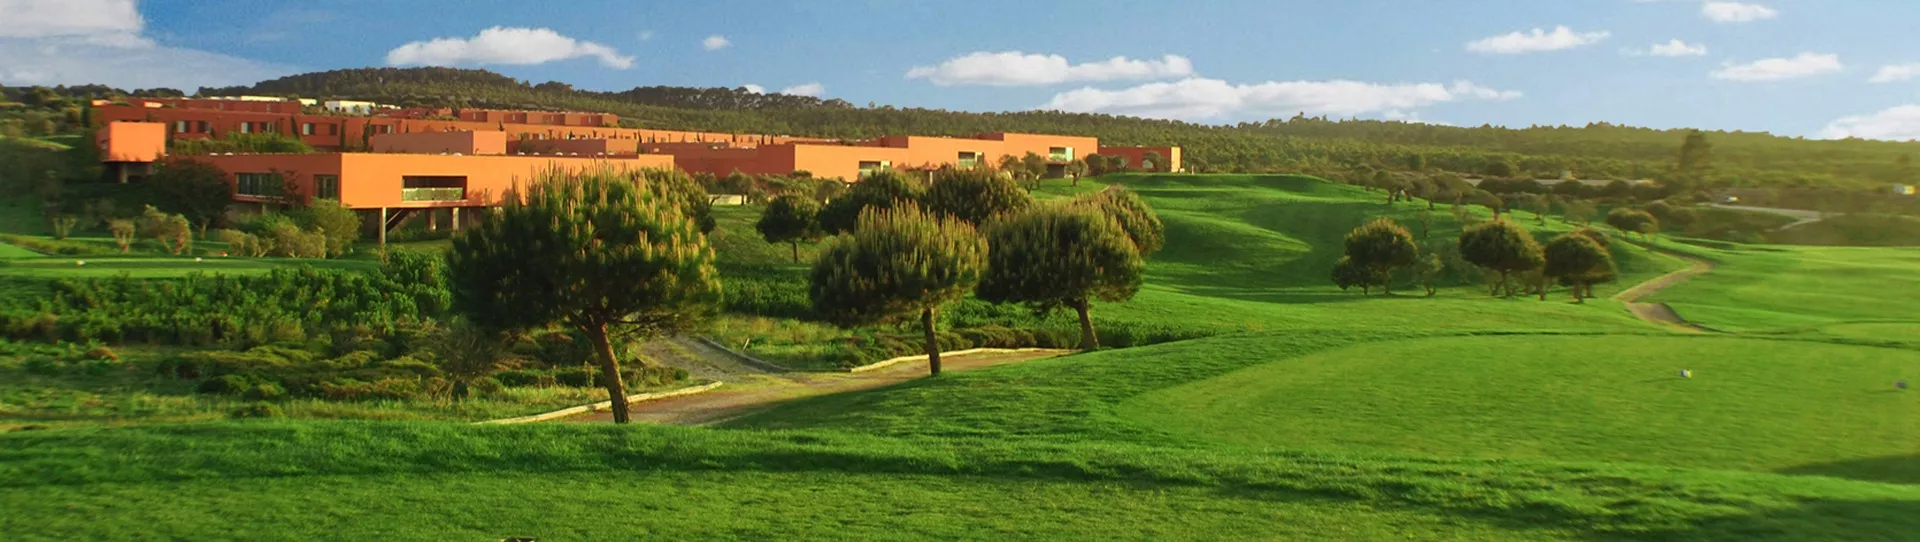 Portugal golf holidays - Bom Sucesso Golf Package - Photo 1